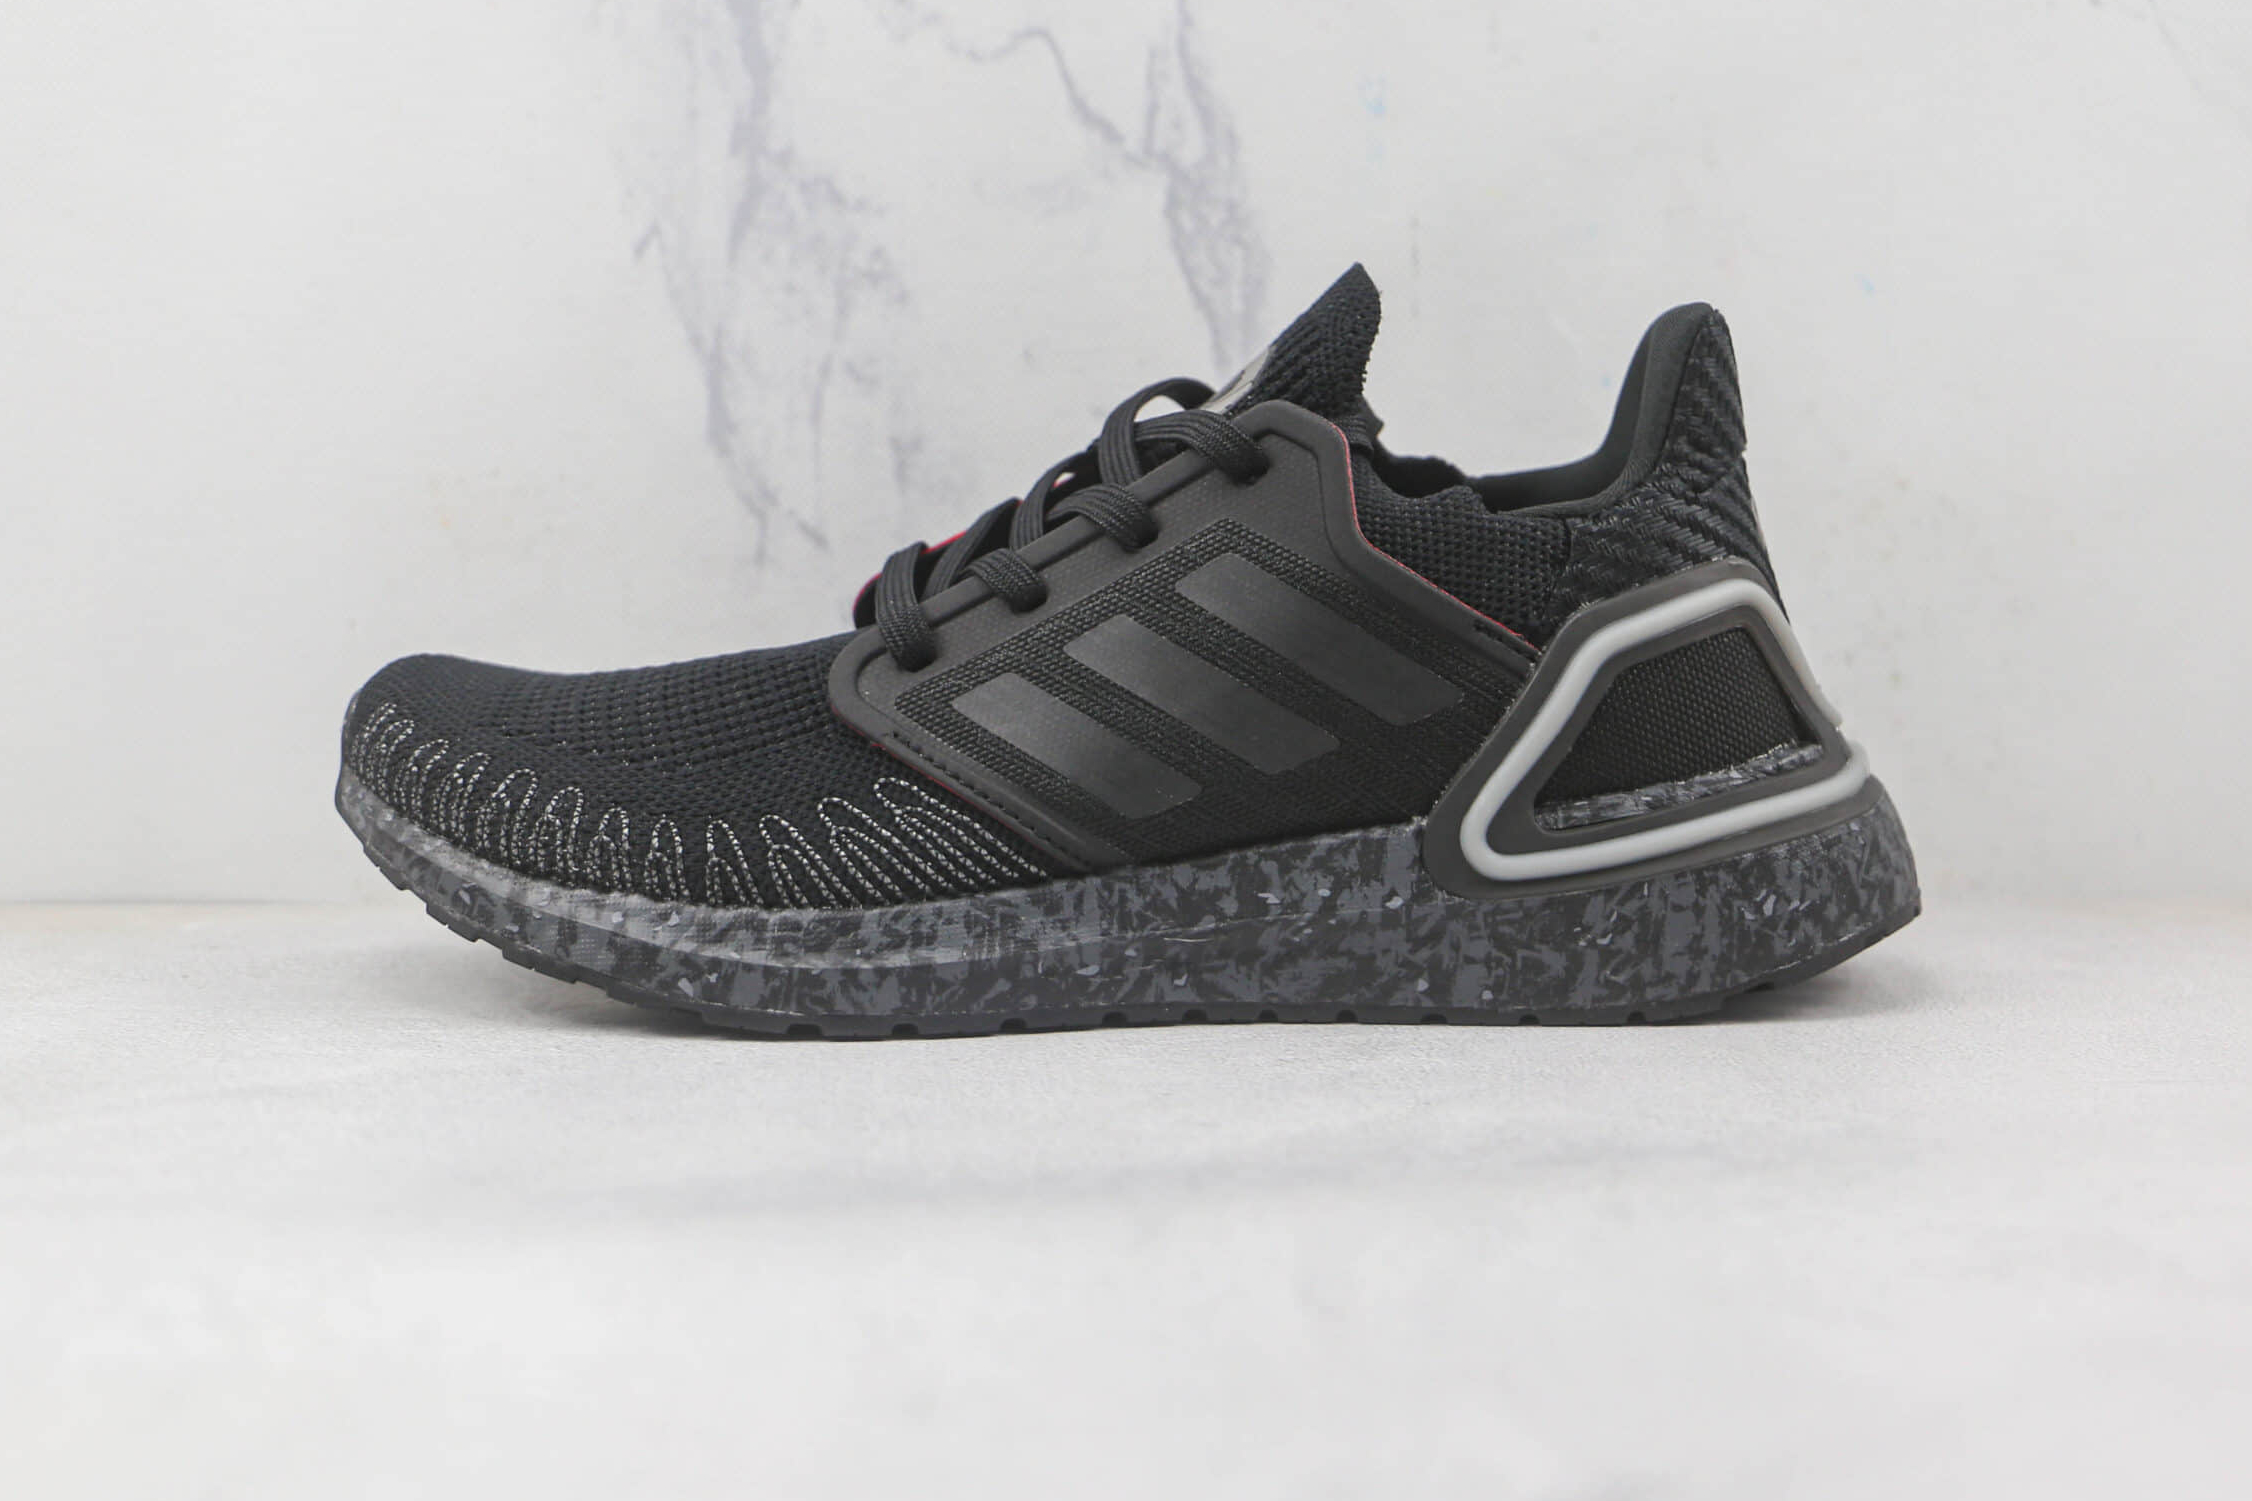 Adidas James Bond x UltraBoost 20 'No Time To Die' - Core Black [FY0646]